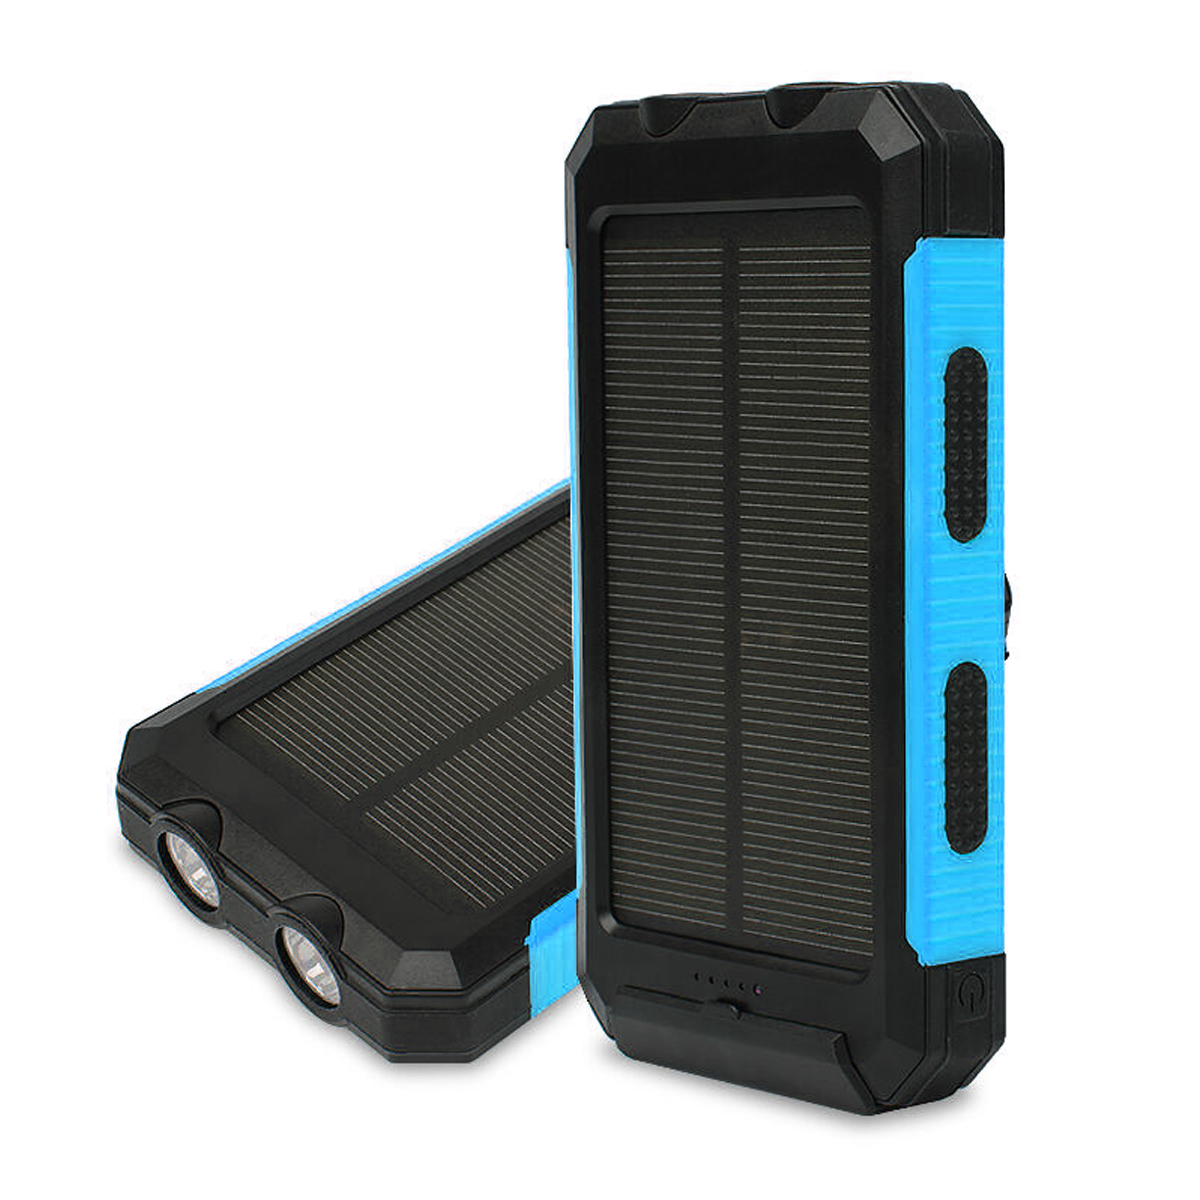 8000MAH-Waterproof-Solar-Power-Bank-Solar-Charger-Built-In-Compass-Dual-USB-Portable-2-LEDs-Light-1716505-5